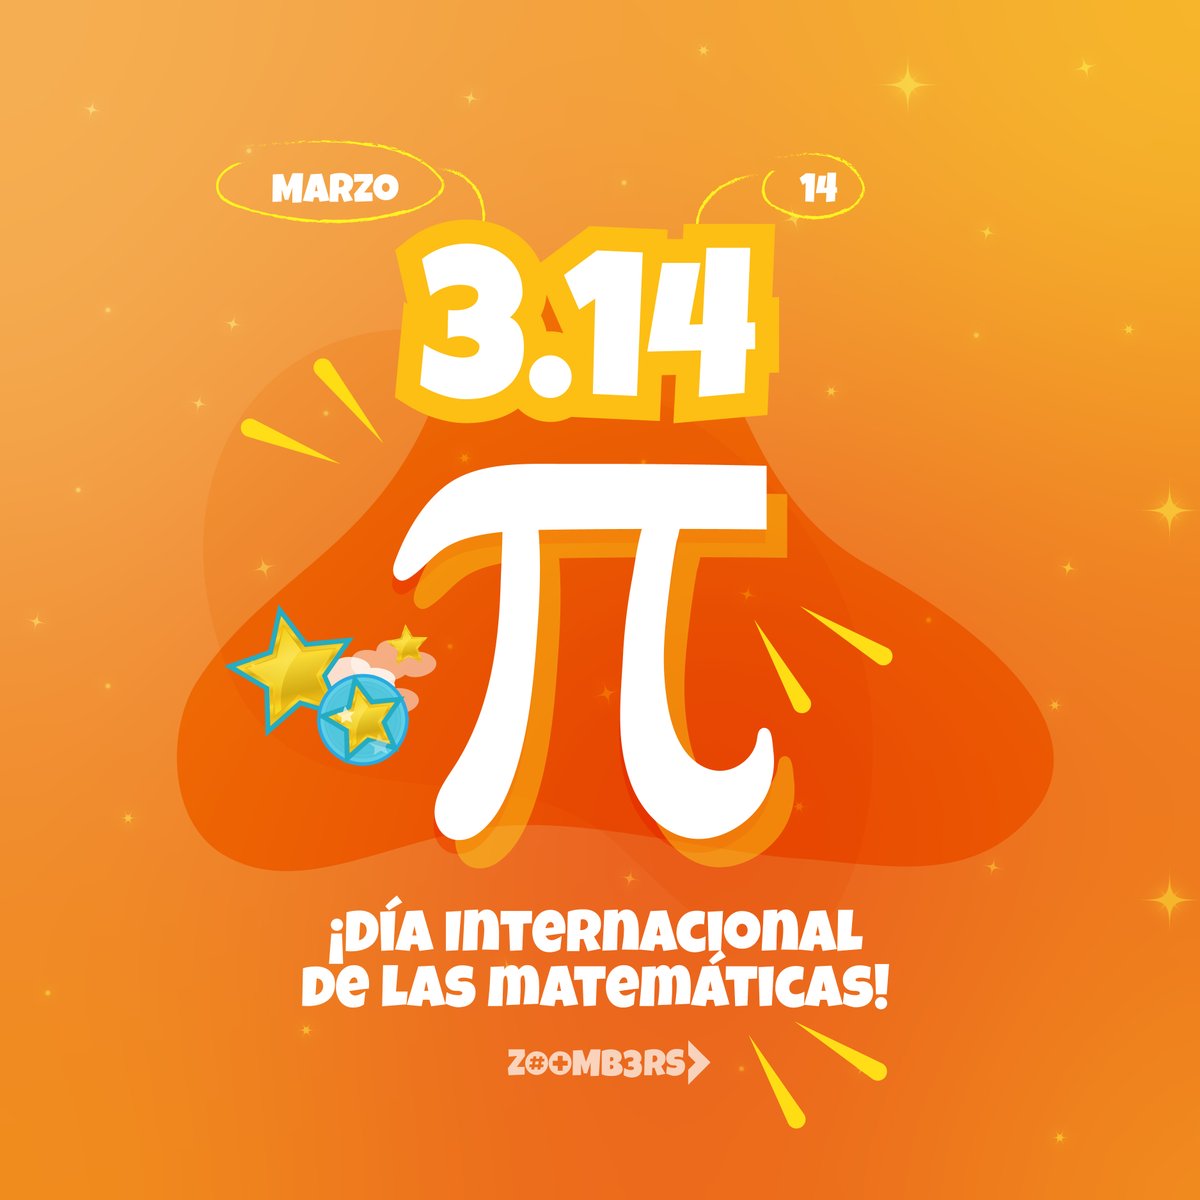 Celebrate the International Day of Mathematics with Zoombers! 🎉 Discover how our platform makes learning math fun and exciting. Join the adventure now! #InternationalMathematicsDay #FunMath 🚀✨